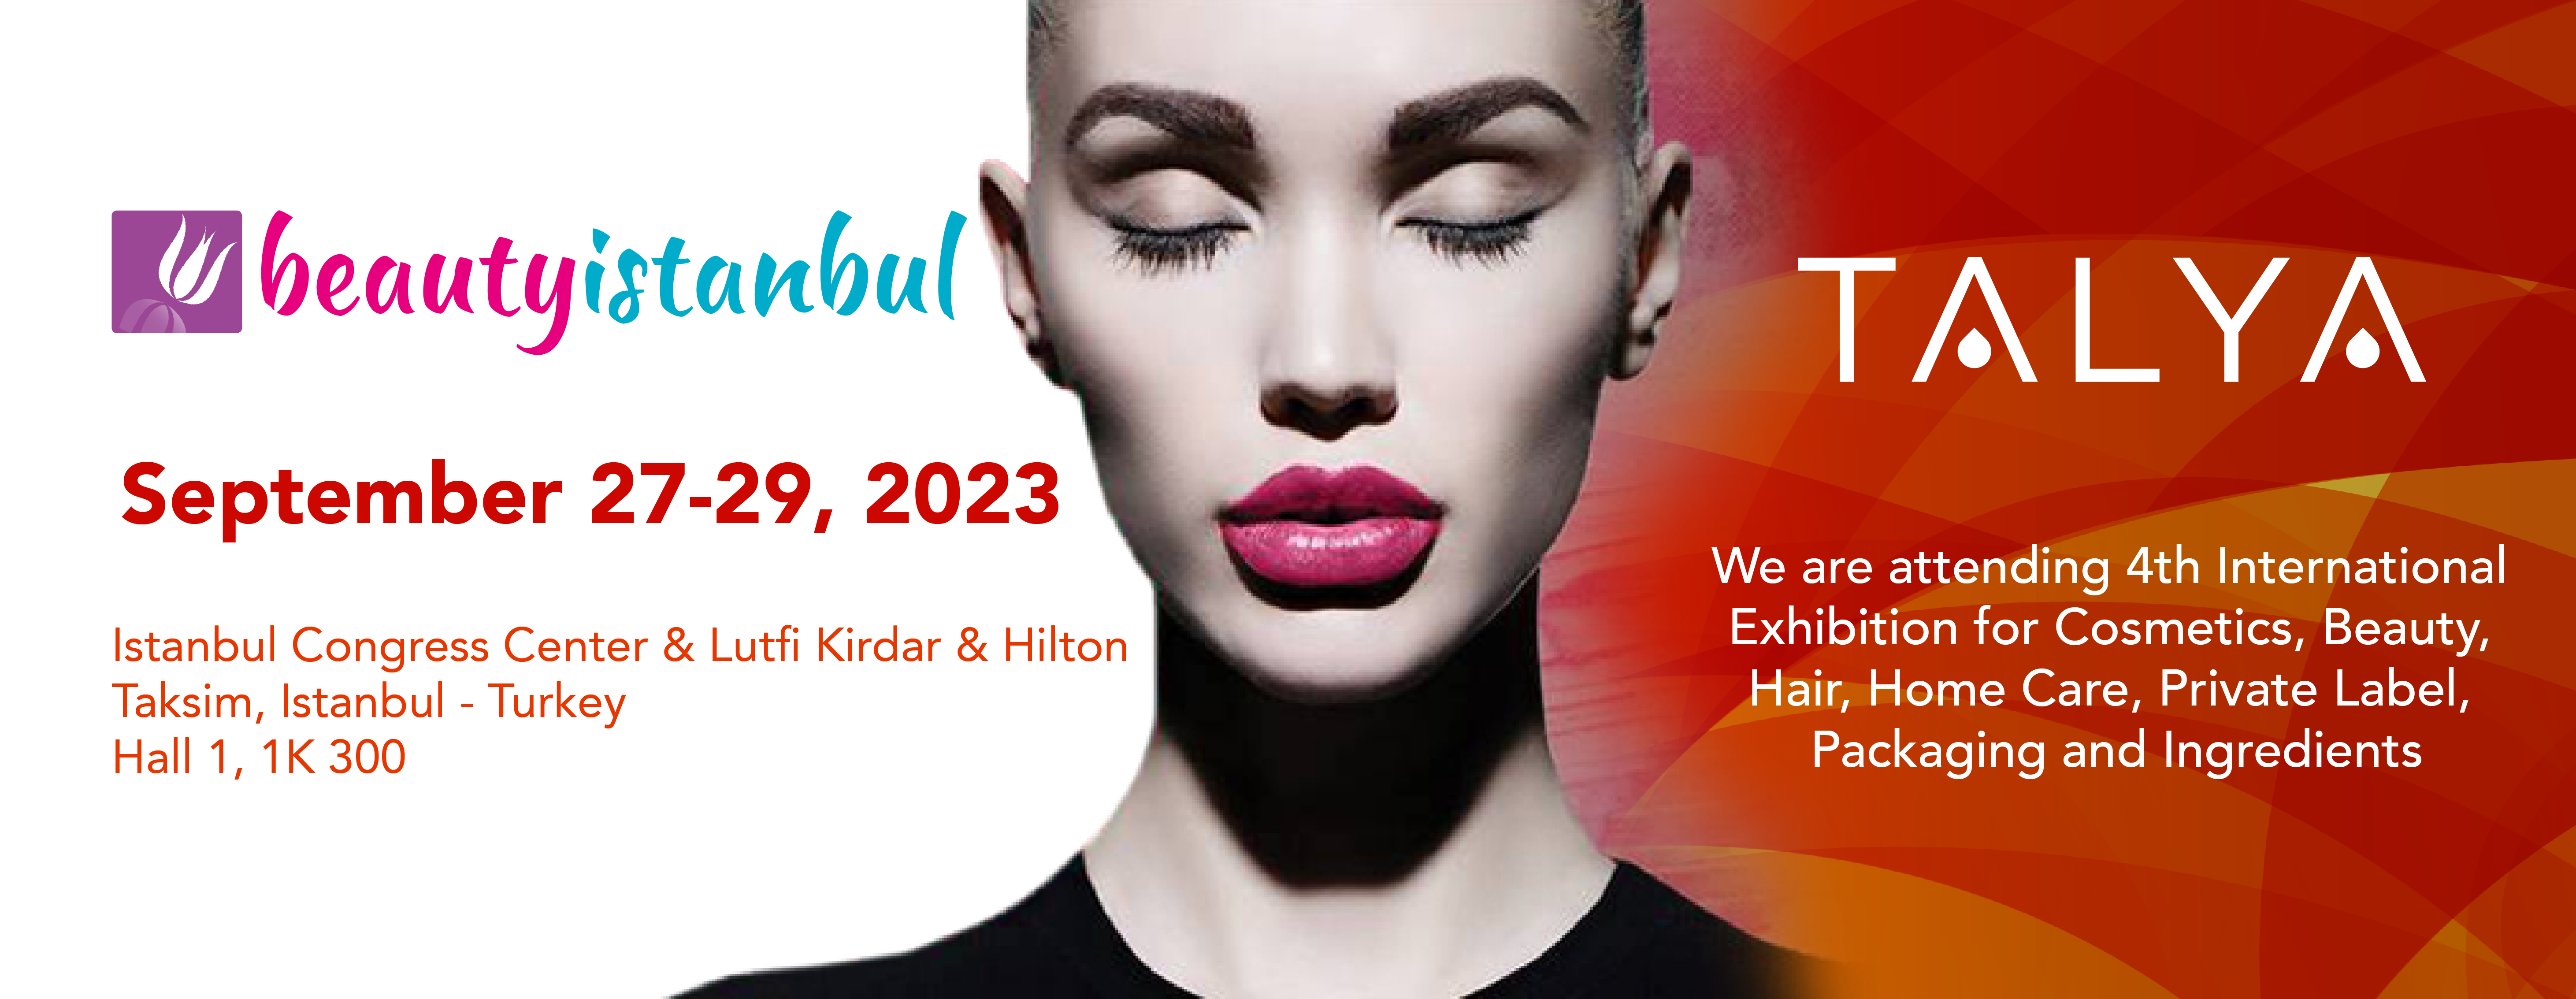 We invite you to our booth at Beauty Istanbul 2023!